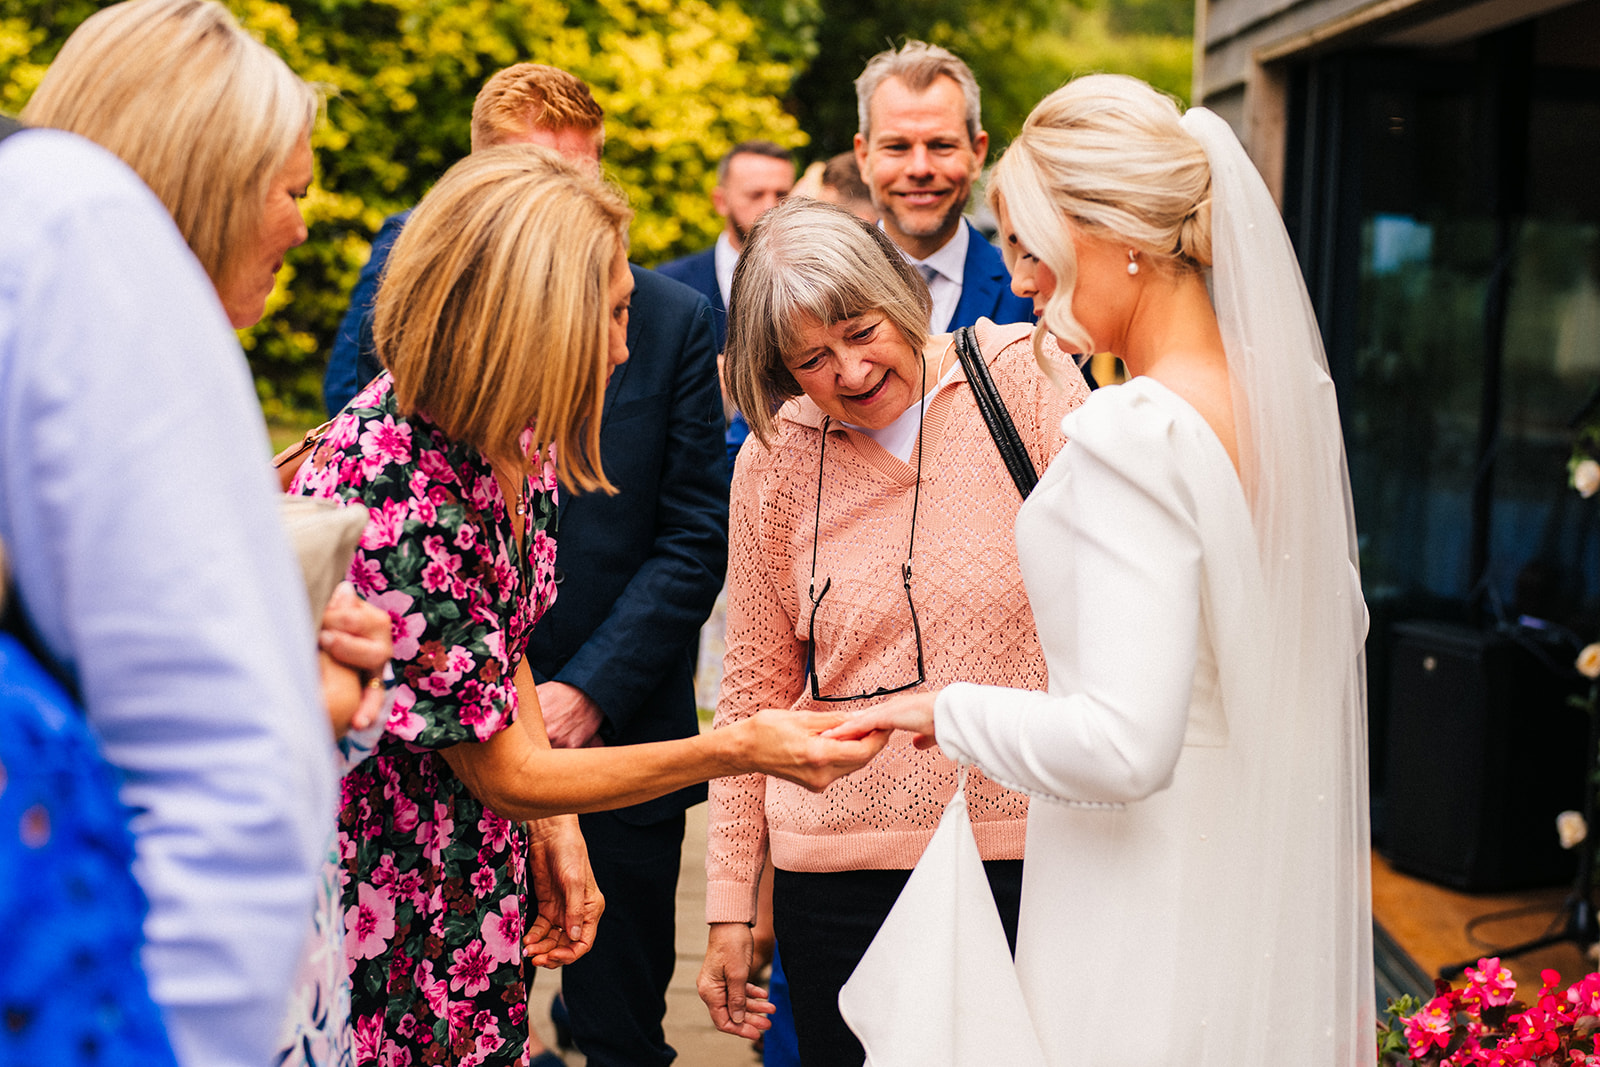 The Chequers Inn Wedding Photography - the bride showing off her wedding ring to the wedding guests